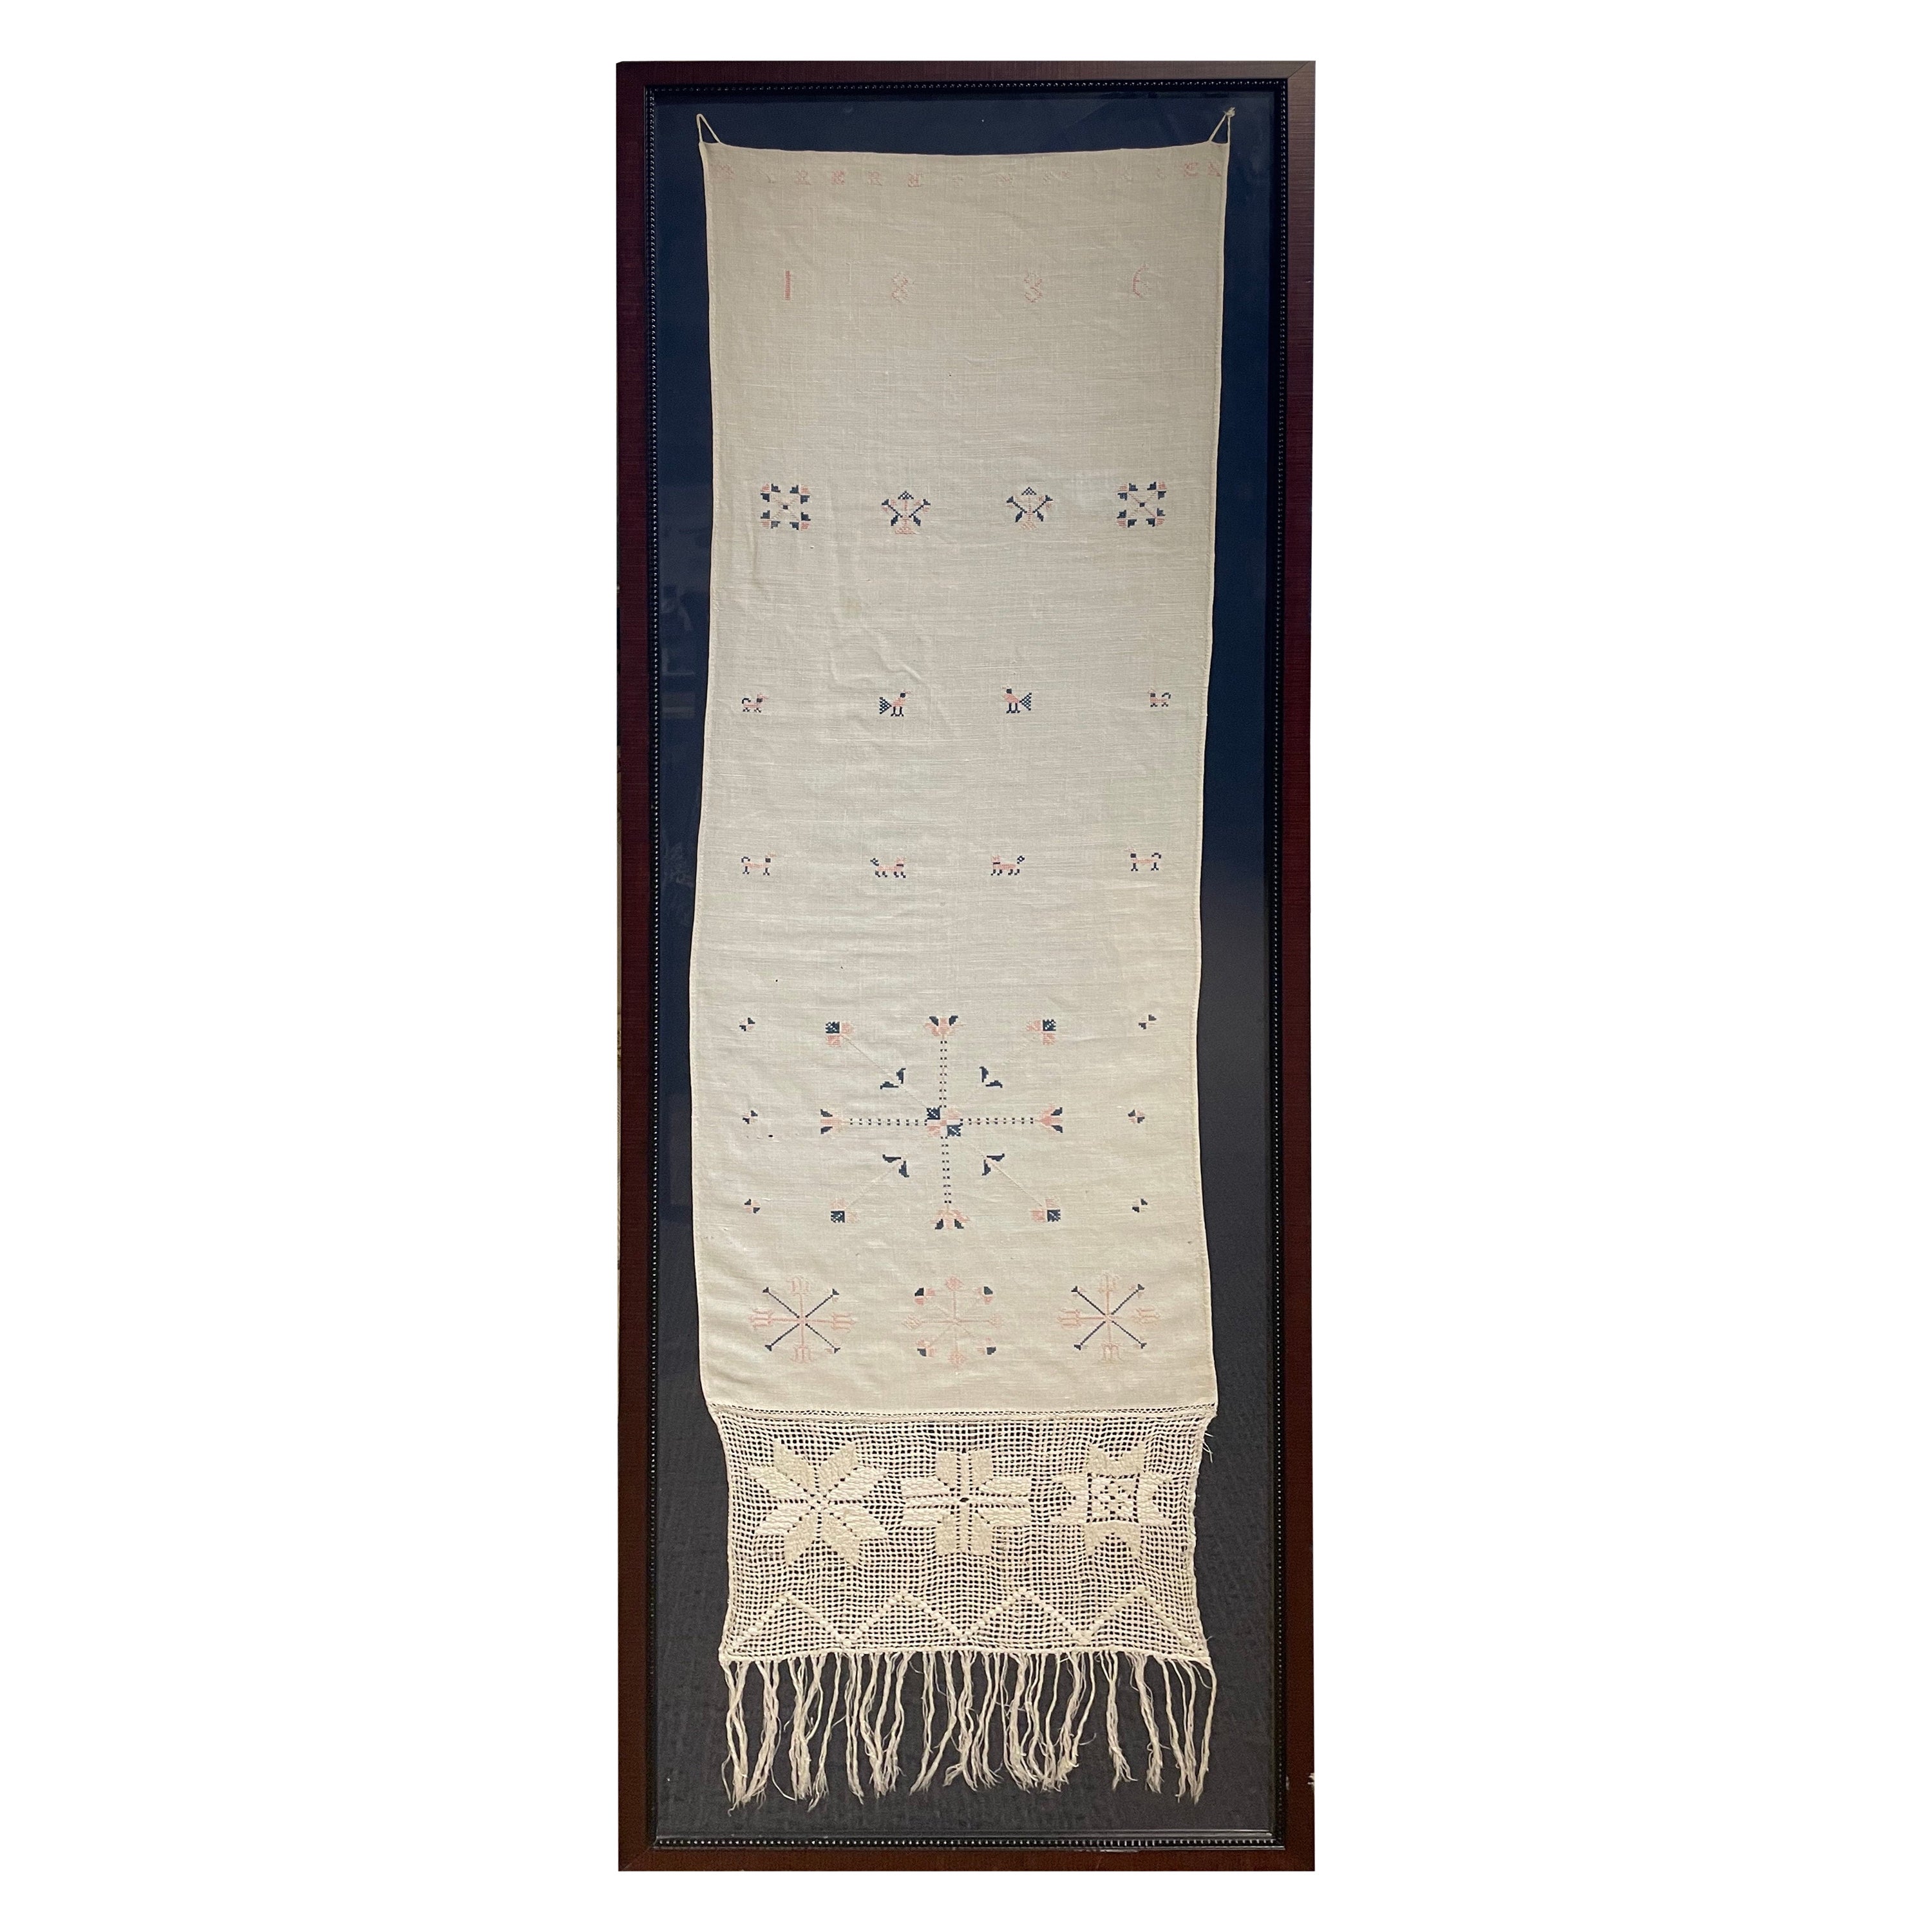 Early 19th Century Needlework "Show Towel" Dated 1836 For Sale